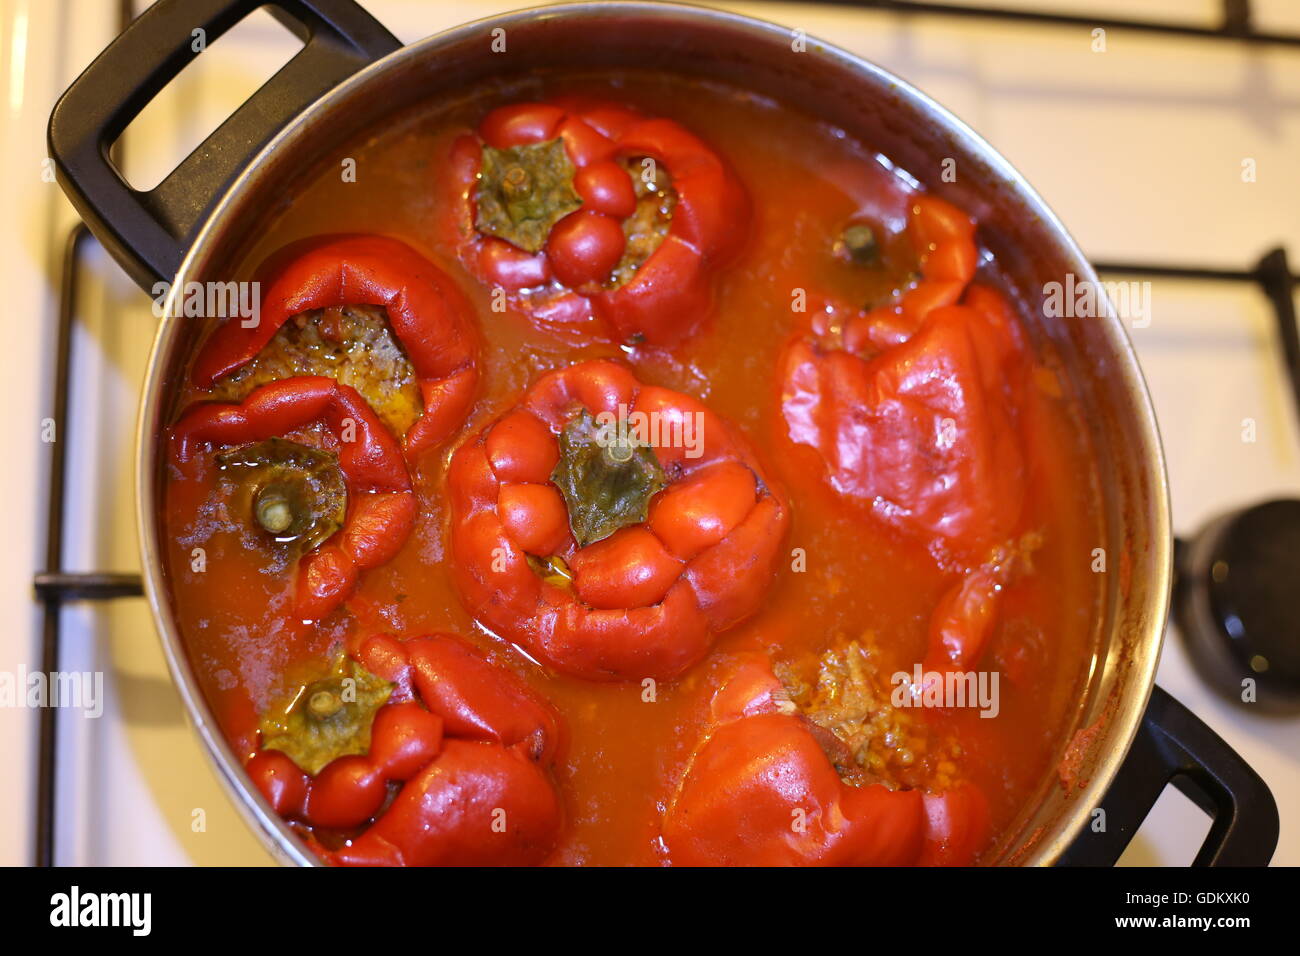 Stuffed Peppers. Homemade stuffed peppers in a pot. Stock Photo